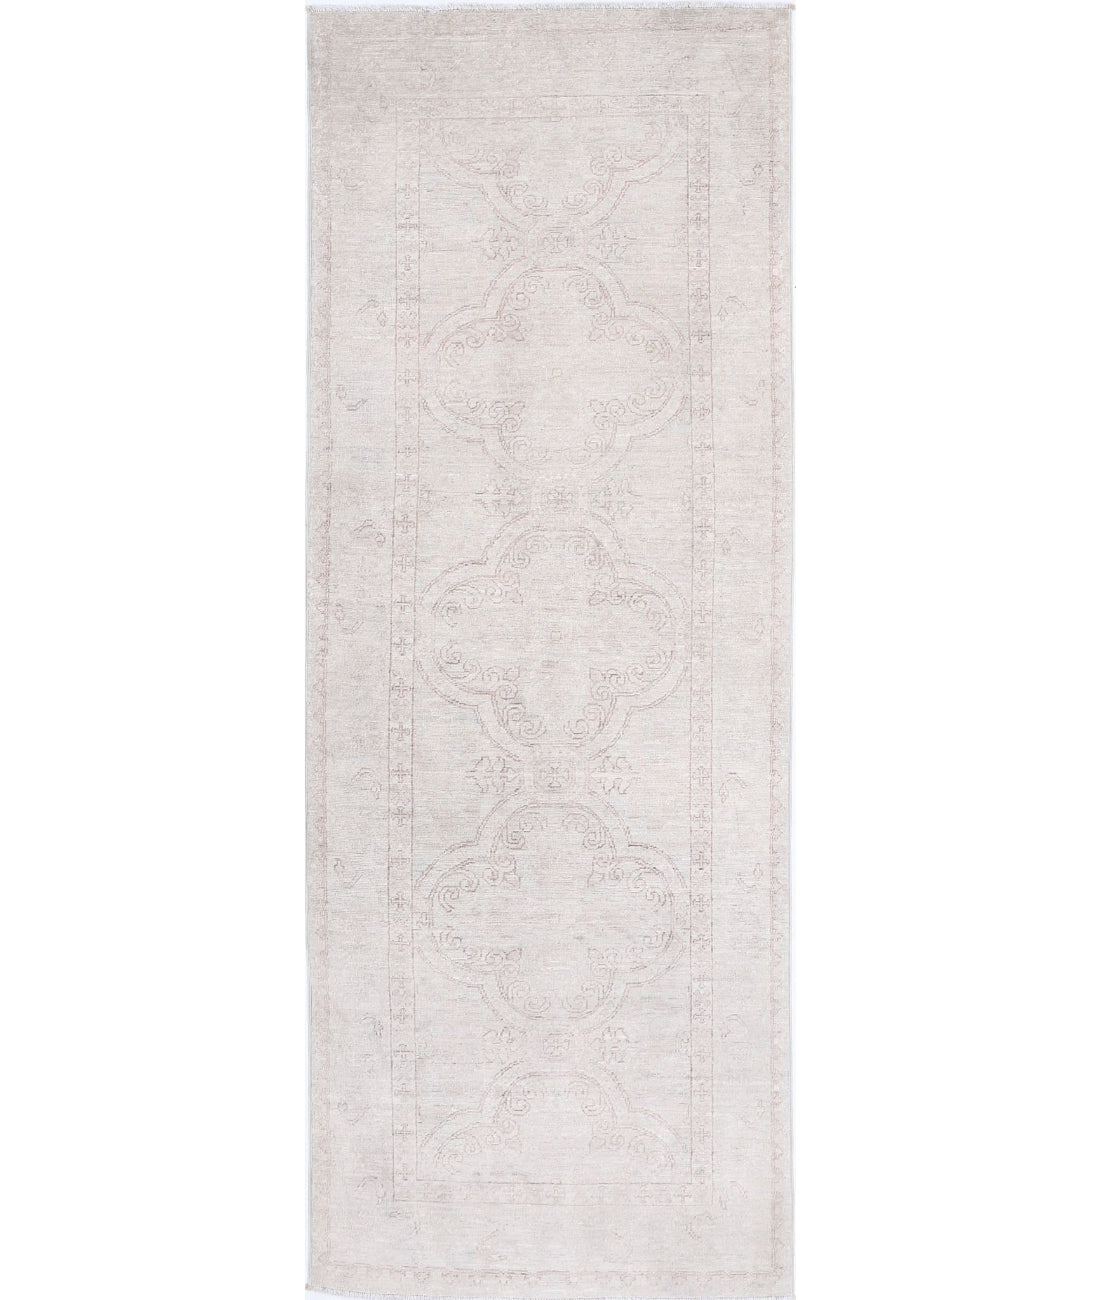 Hand Knotted Fine Serenity Wool Rug - 2'8'' x 8'0'' 2'8'' x 8'0'' (80 X 240) / Ivory / Taupe